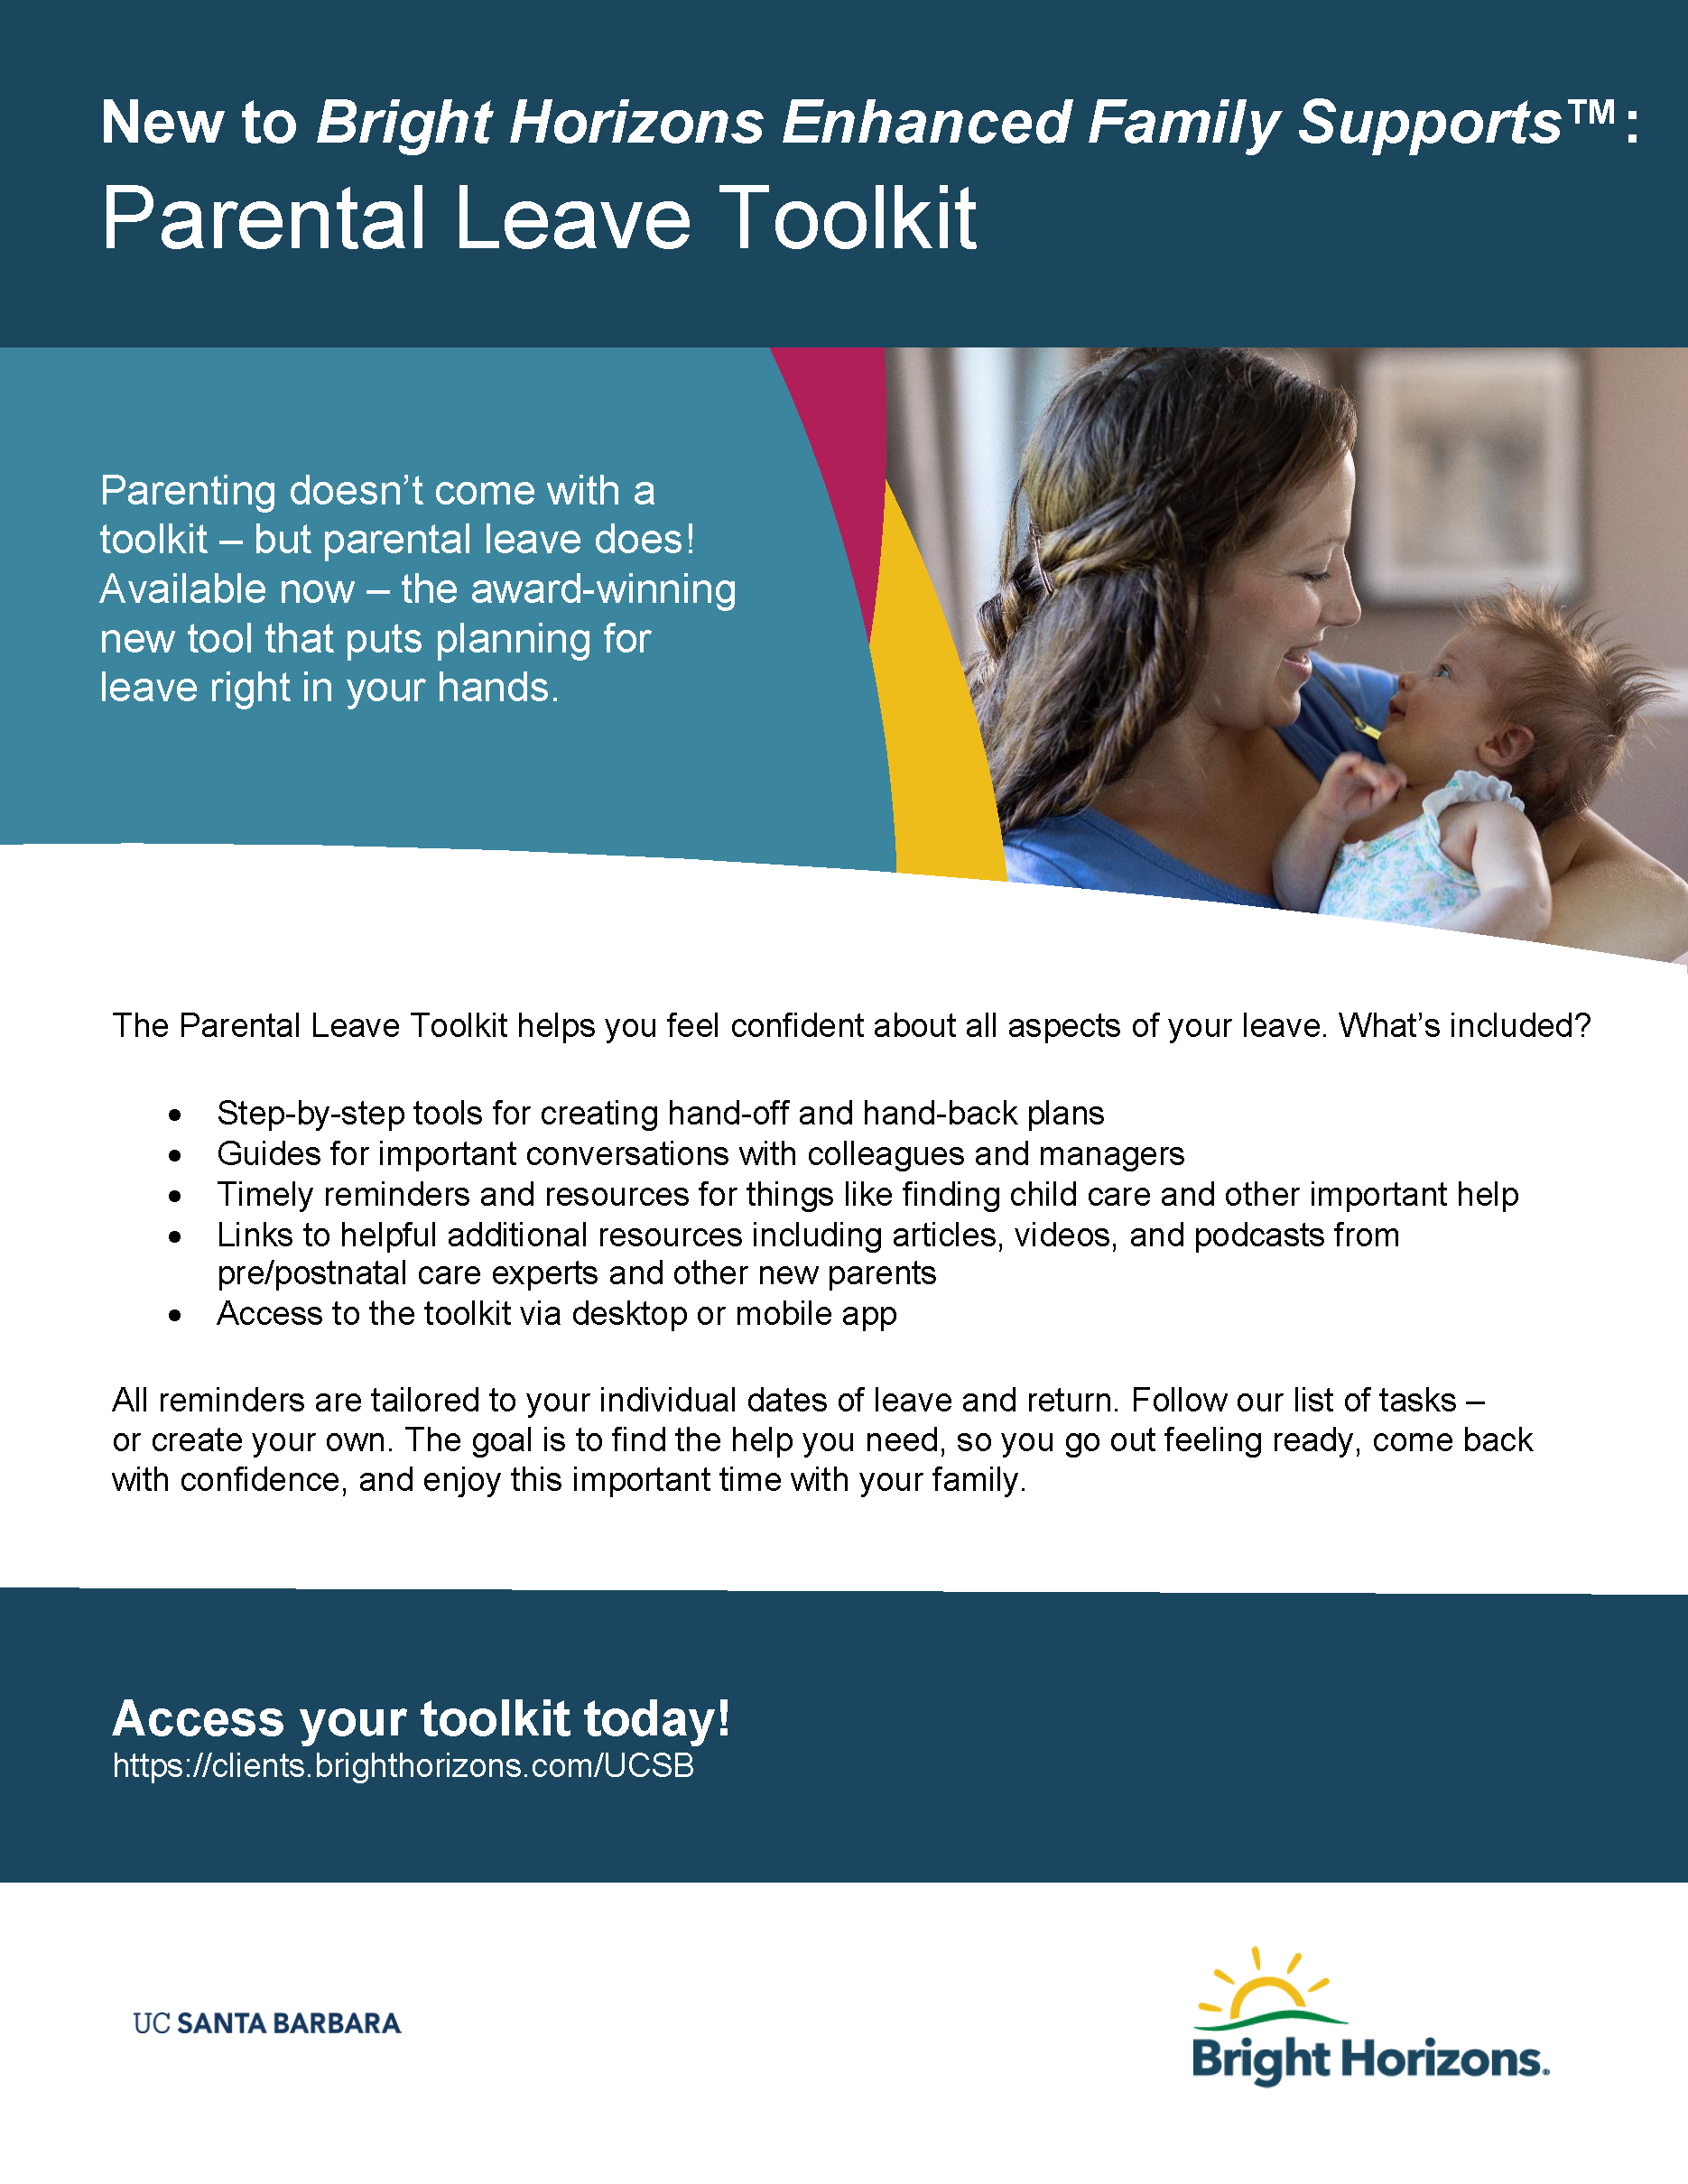 Parental Leave Toolkit Overview